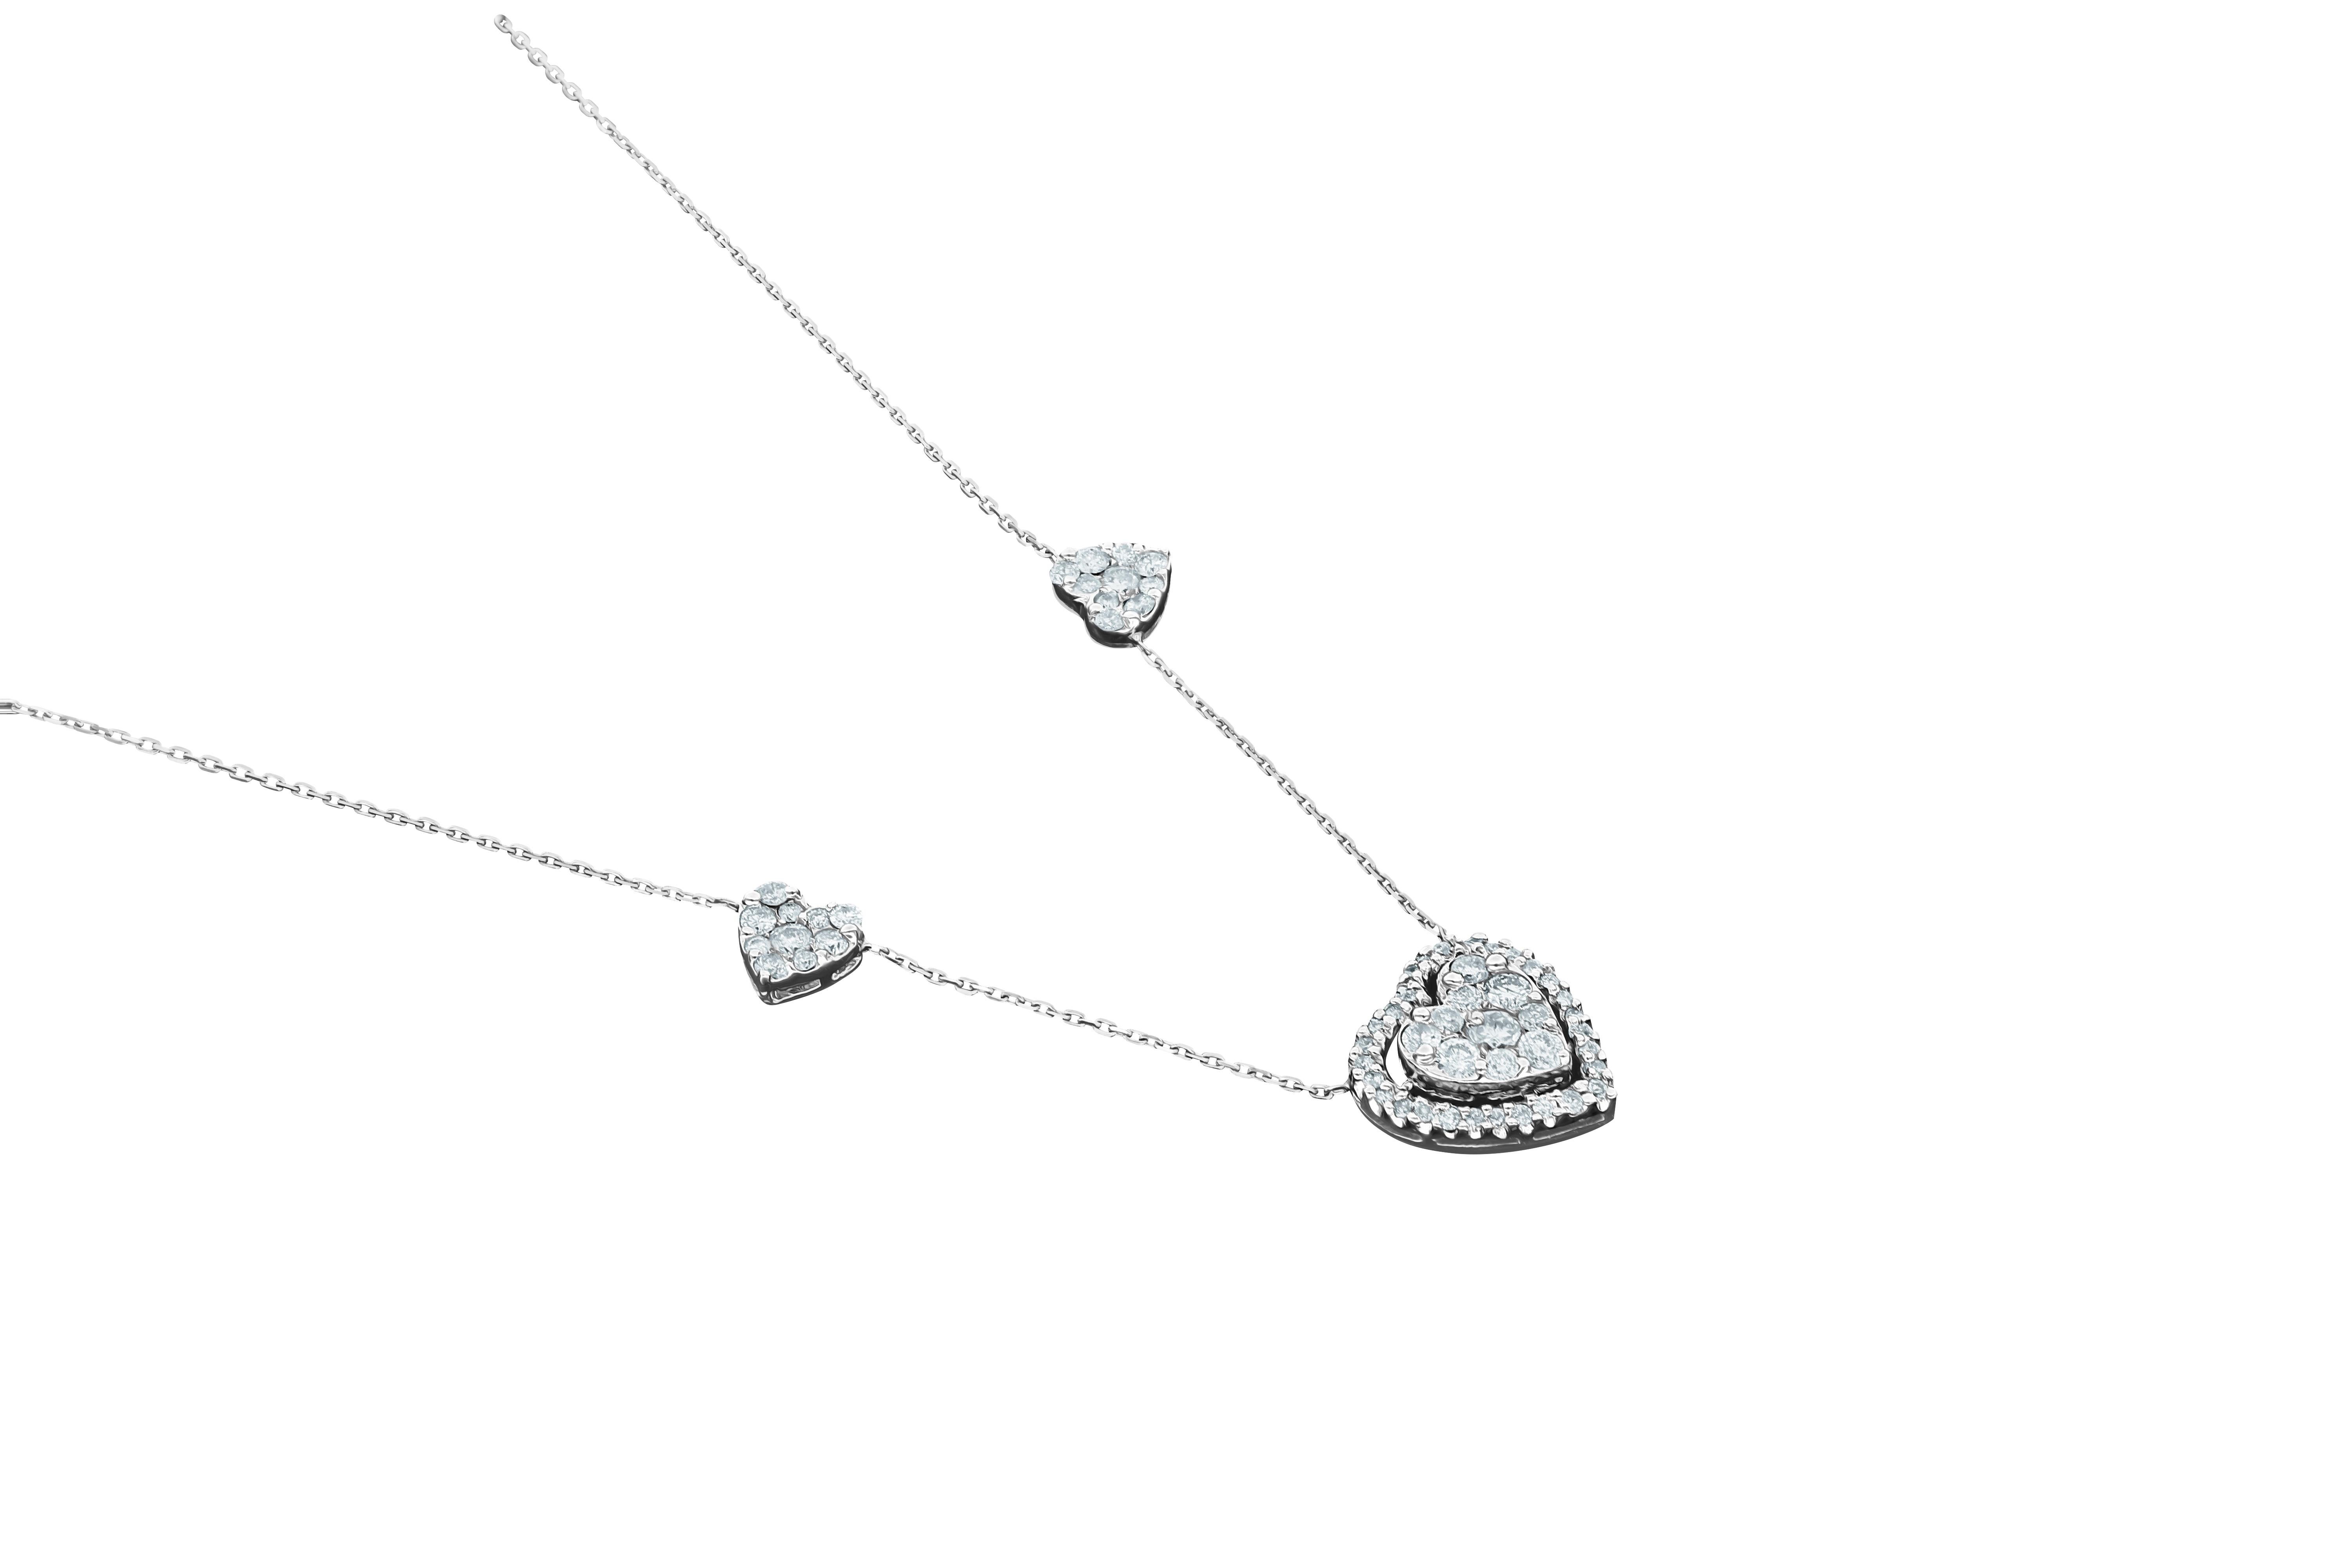 Scintillating, stylish 18K White Gold Amwaj Pendant with diamonds. This unique Pendant is cut to a high level of quality with round shape Diamonds making an illusion of a heart. The round shape Diamond halo, around the center heart, is stunning in